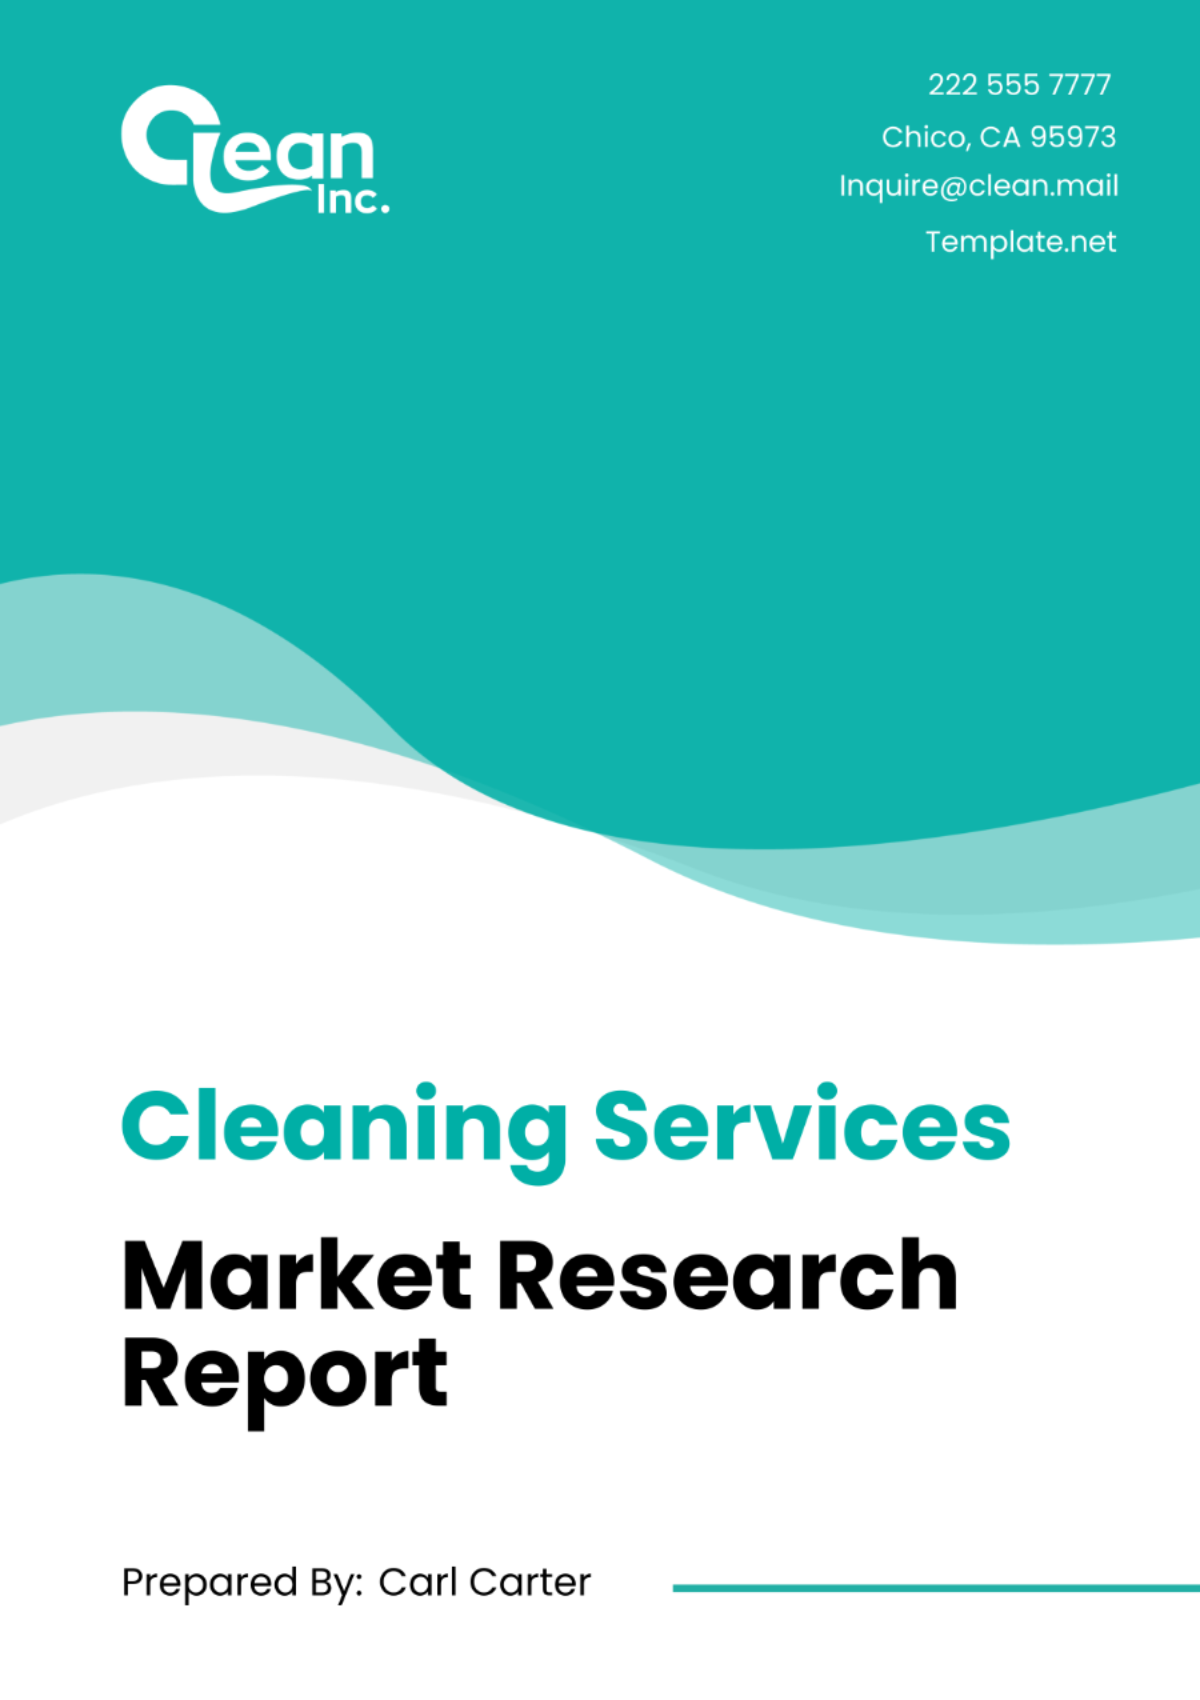 Cleaning Services Market Research Report Template